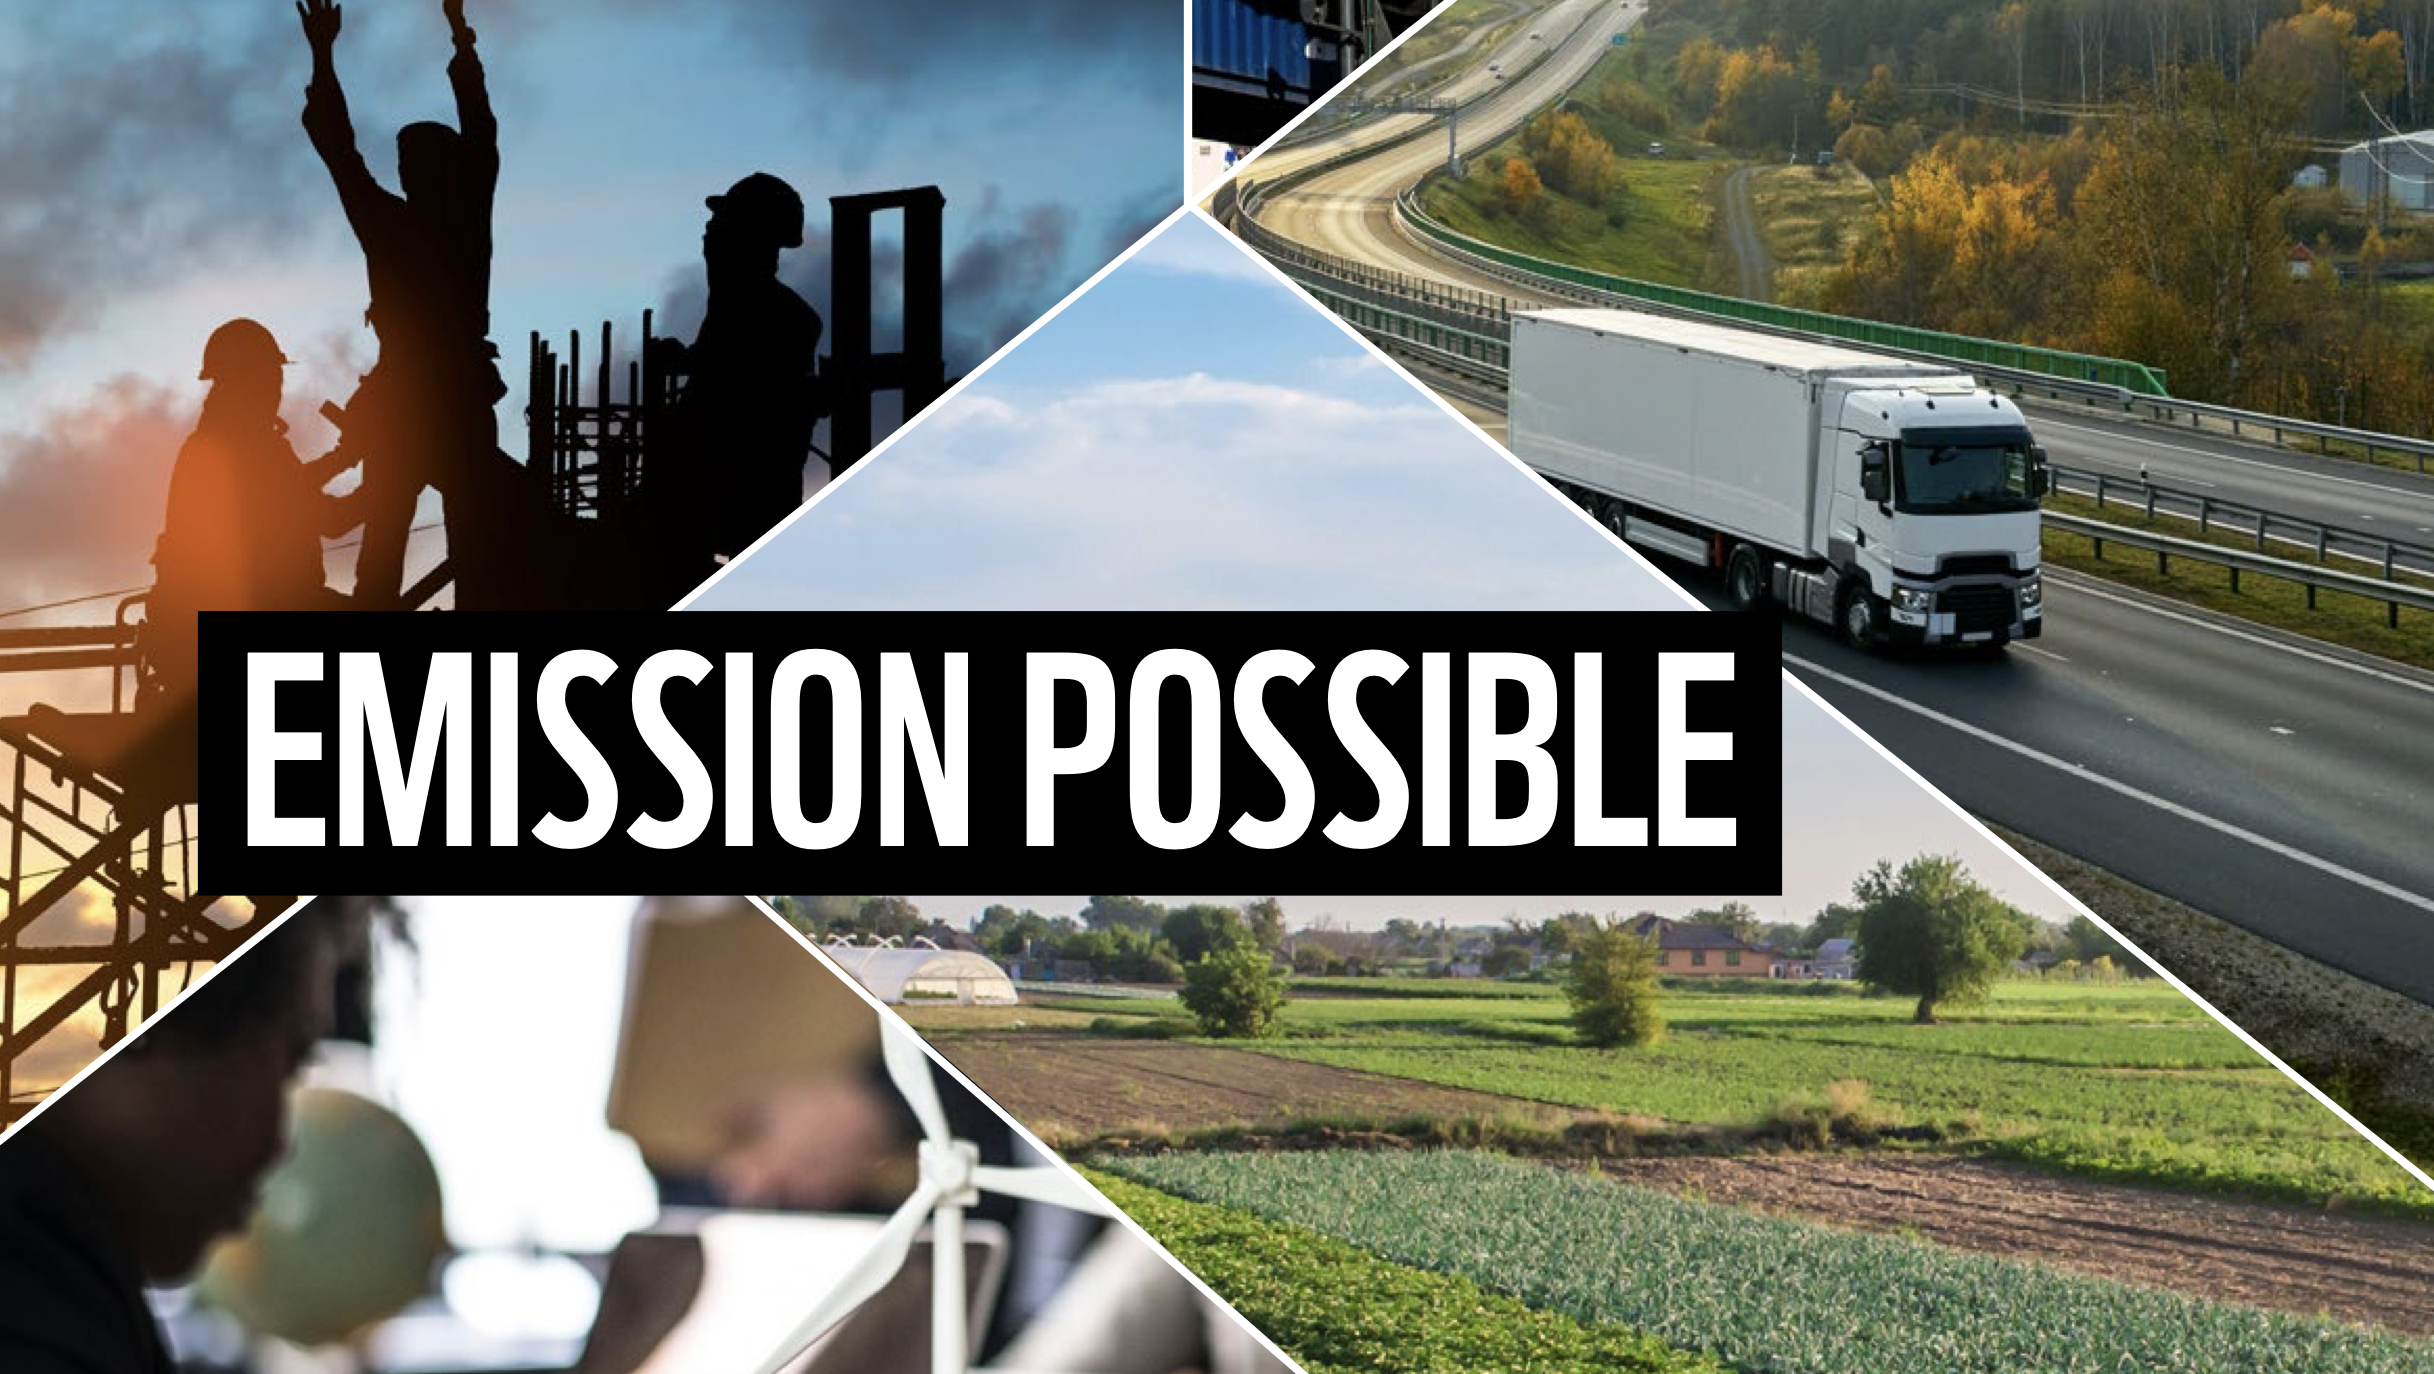 Text emission possible, images of landscape, lorry and person